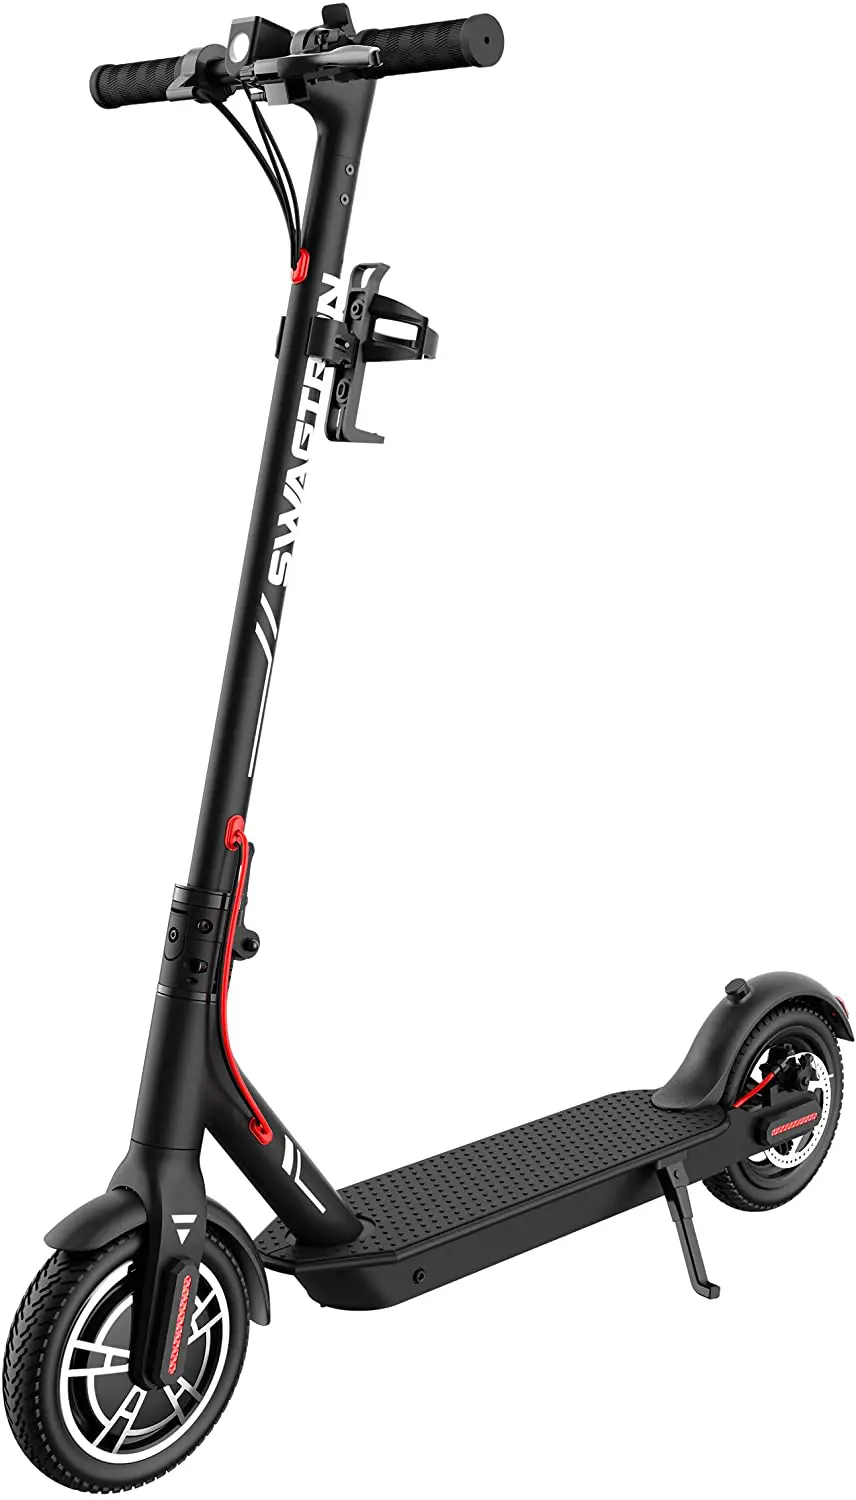 SWAGTRON Swagger SG-5 300W Electric Scooter